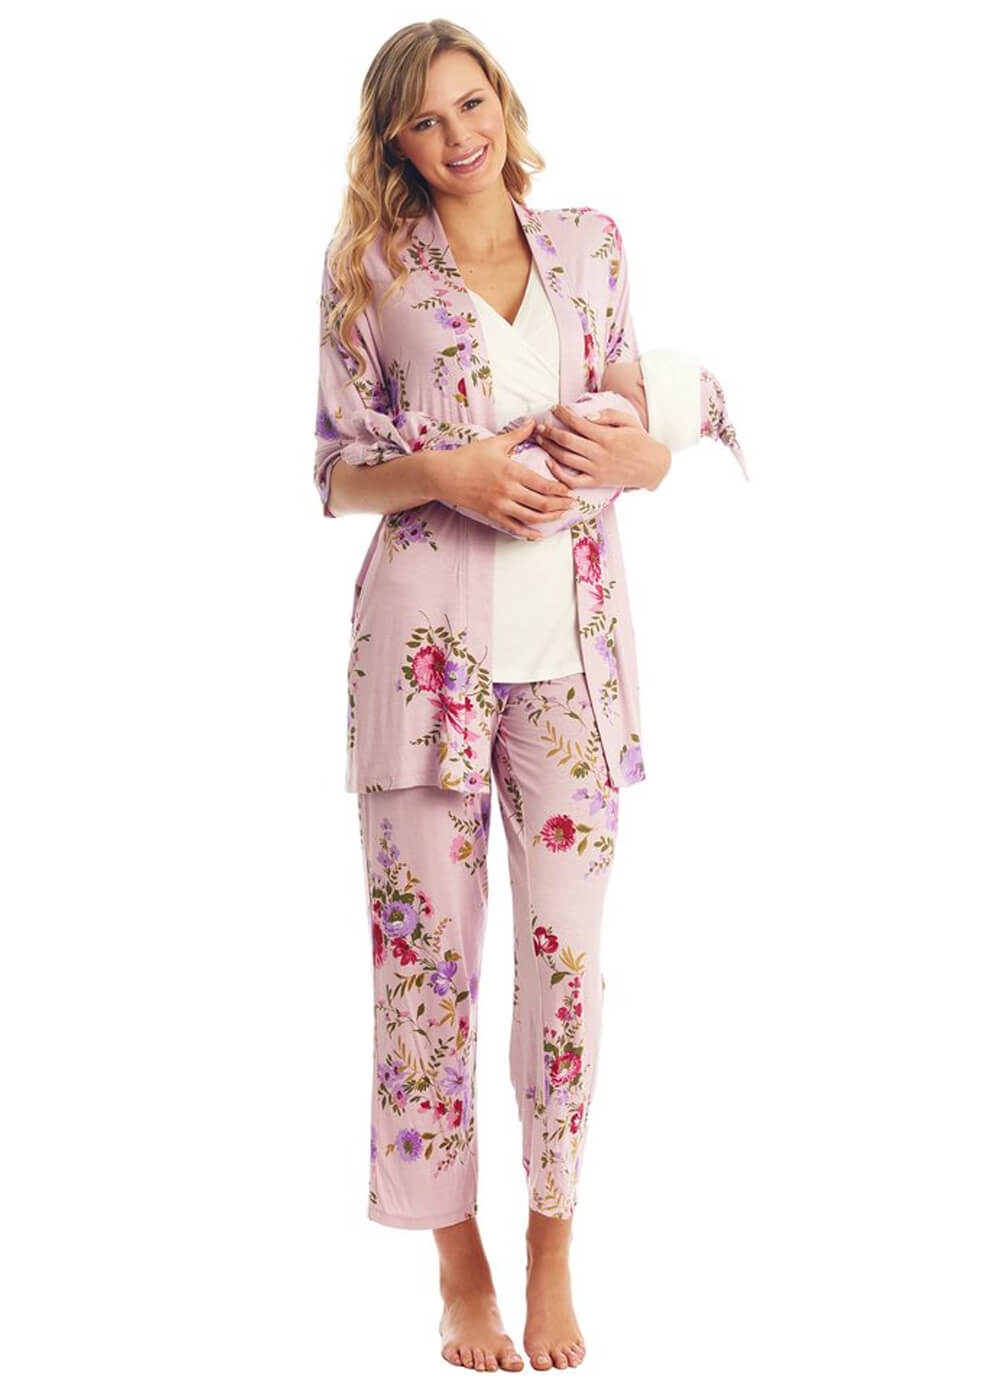 Everly Grey - Analise Mommy & Me PJ Gift Set in Dusty Rose